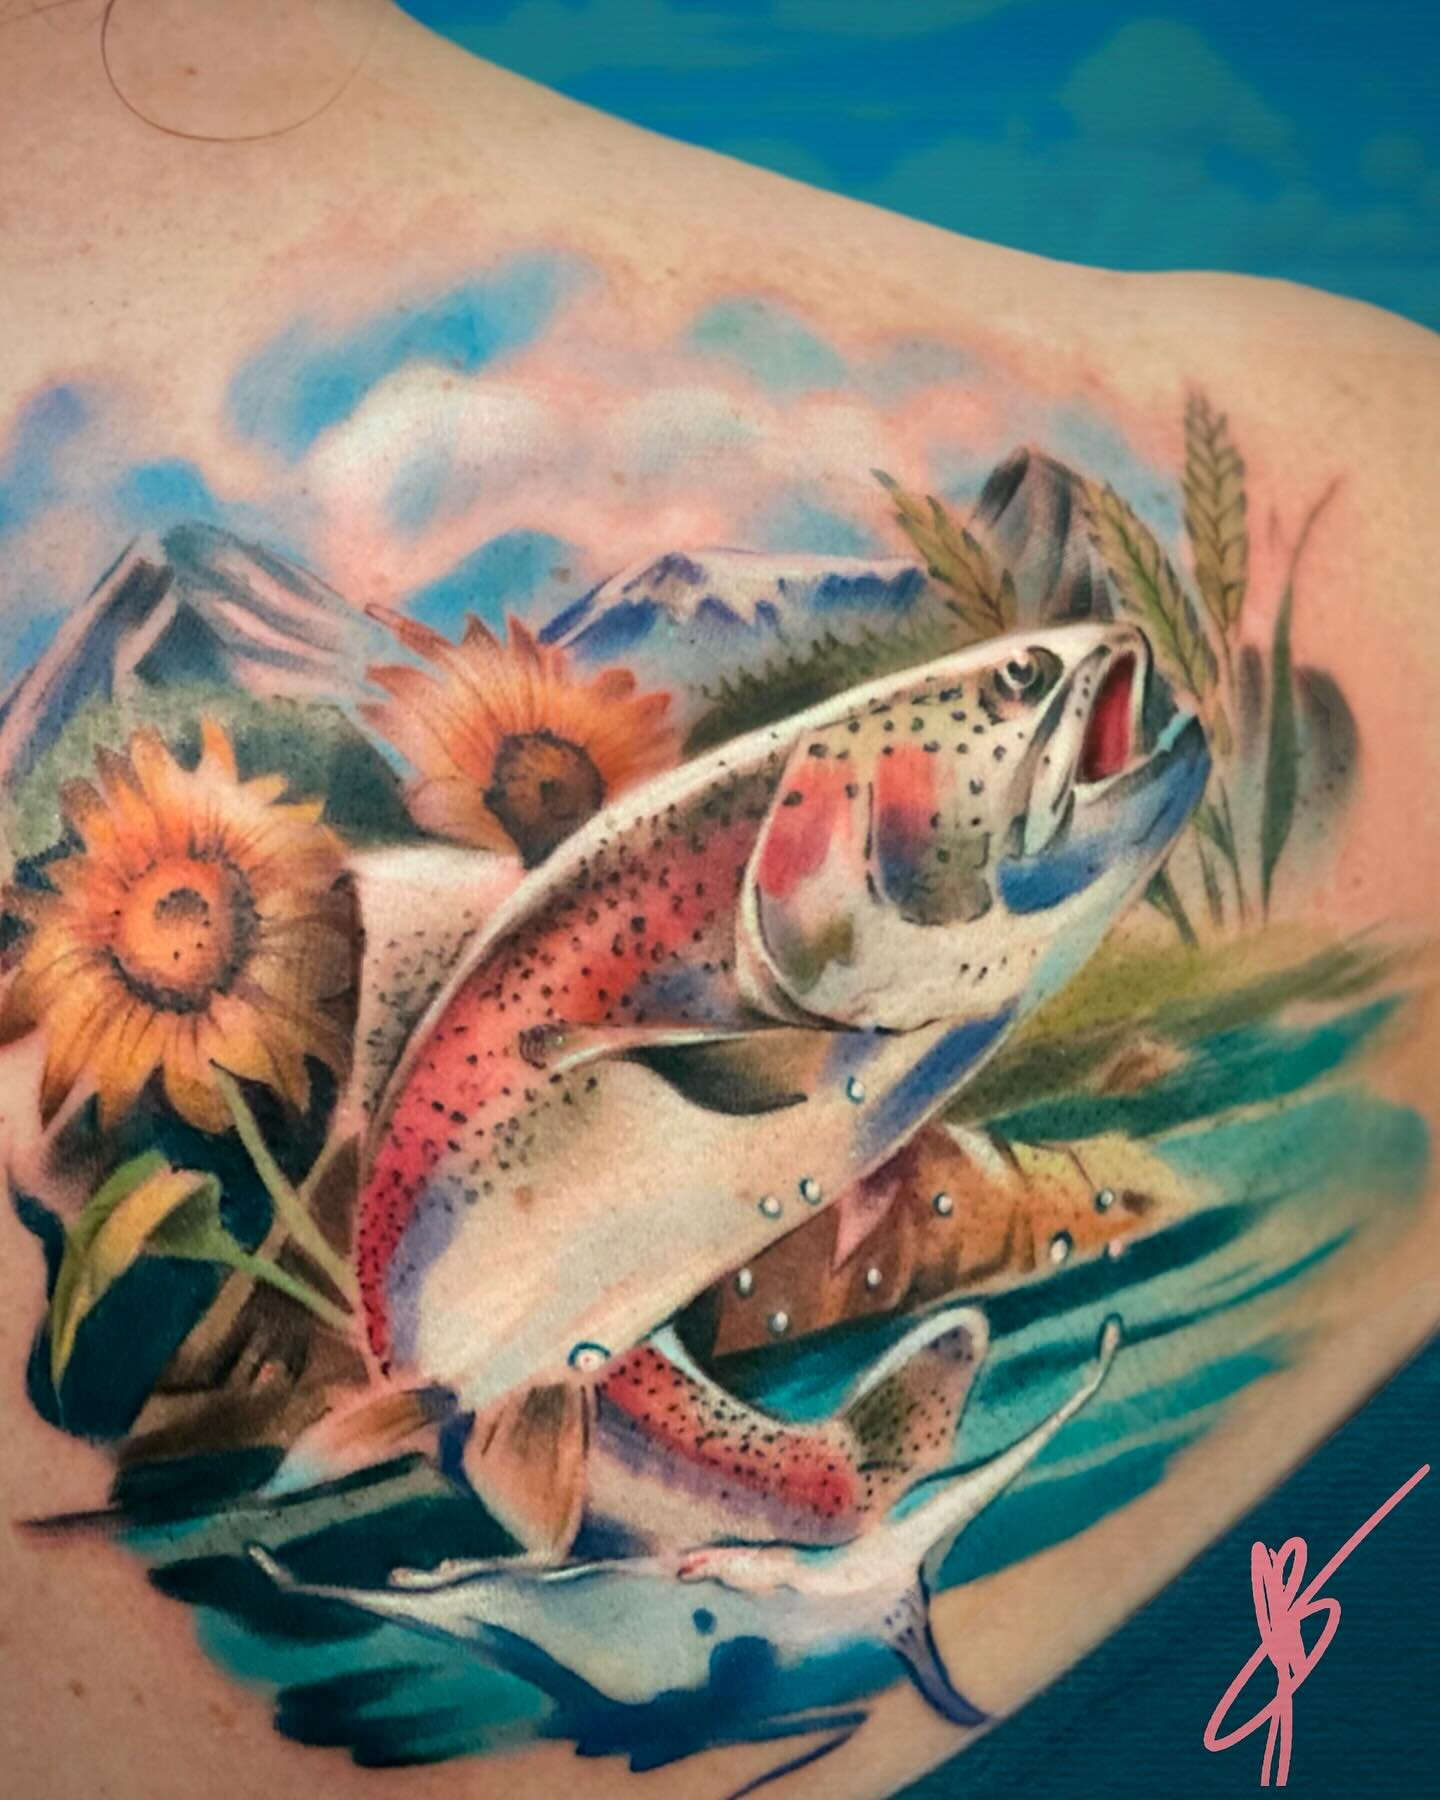 Rainbow trout, sun flowers, and winter wheat: memories of a trip to Montana. People get tattoos to commemorate trips and events. Others get them to remember loved ones. Some use tattoos as a way to express themselves. Often clients tell me that they 